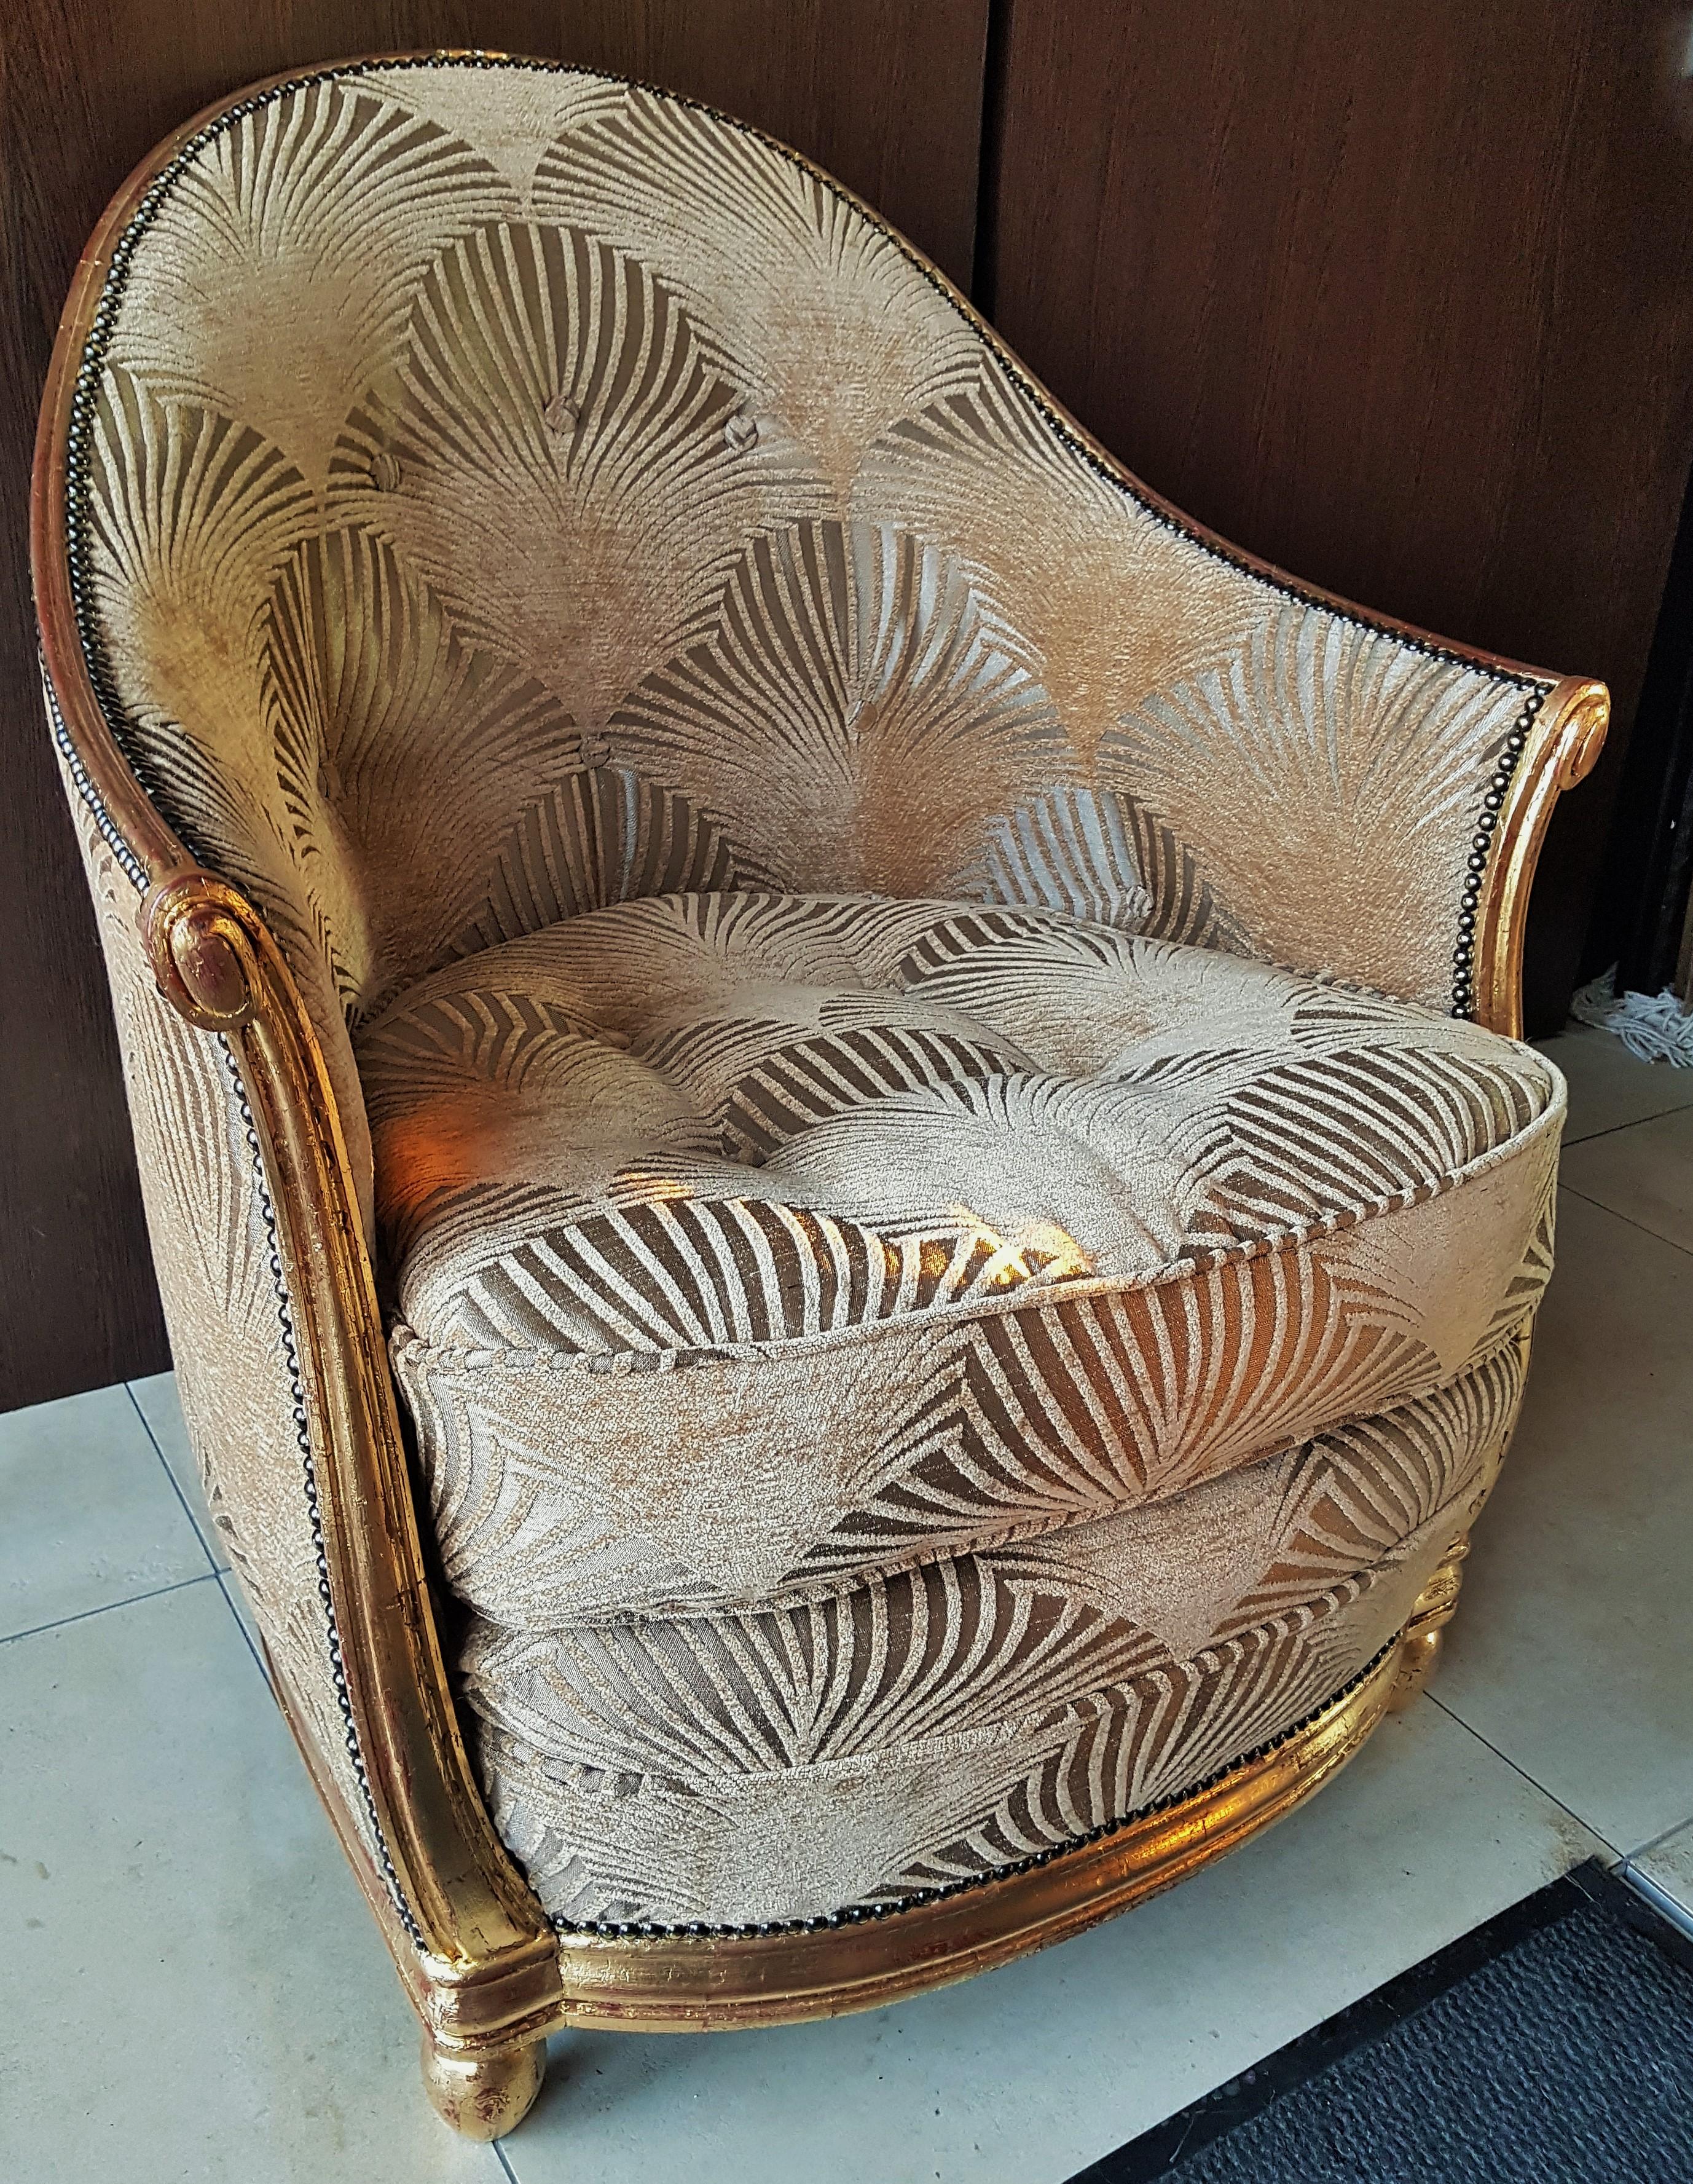 Original Art Deco armchair, style Paul Follot, Sue et Mare, France, early 1920s.

Frame gold leaf.
New upholstery in suede with Art Deco decor.